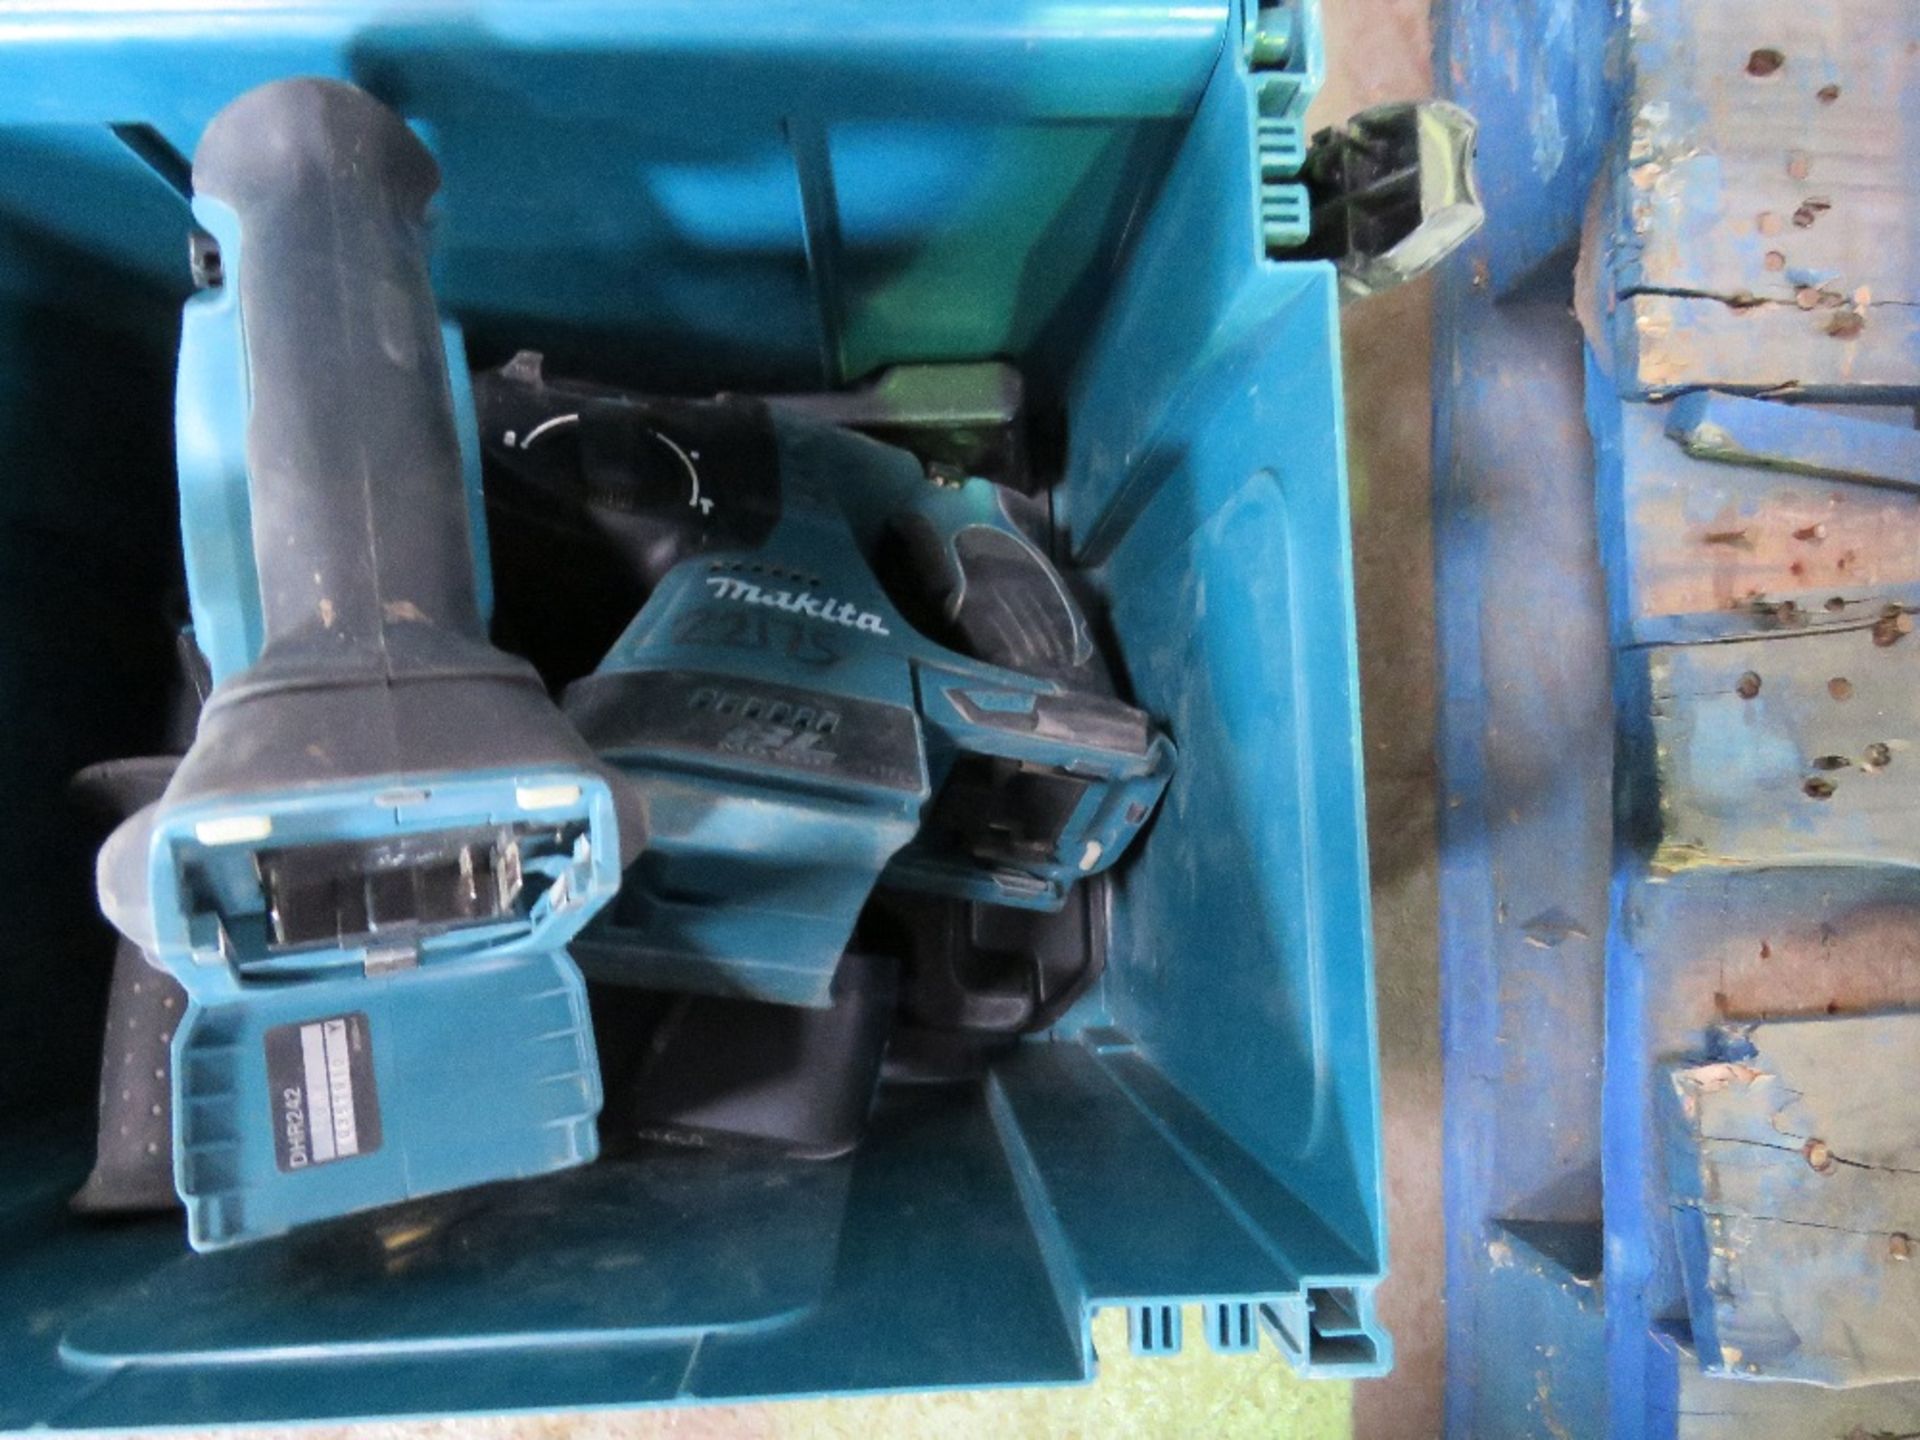 2 X MAKITA DHR242 DRILLS WITH A CHARGER BUT NO BATTERIES. UNTESTED, CONDITION UNKNOWN. - Image 2 of 3